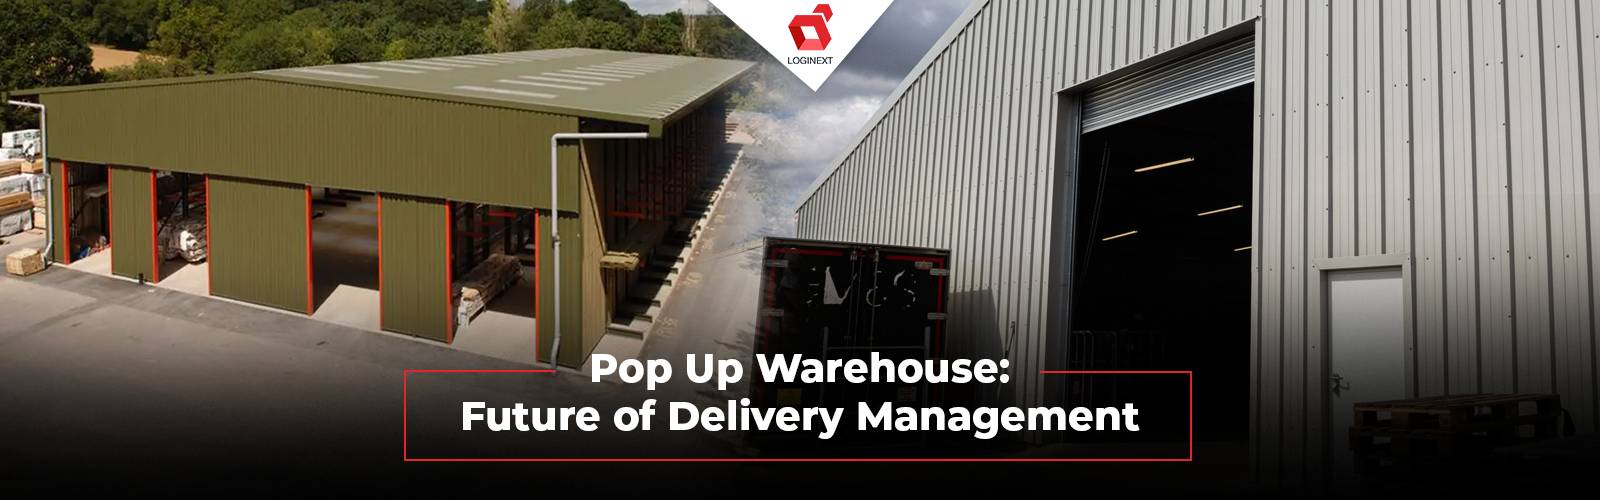 Pop-up Warehousing - Everything you need to know